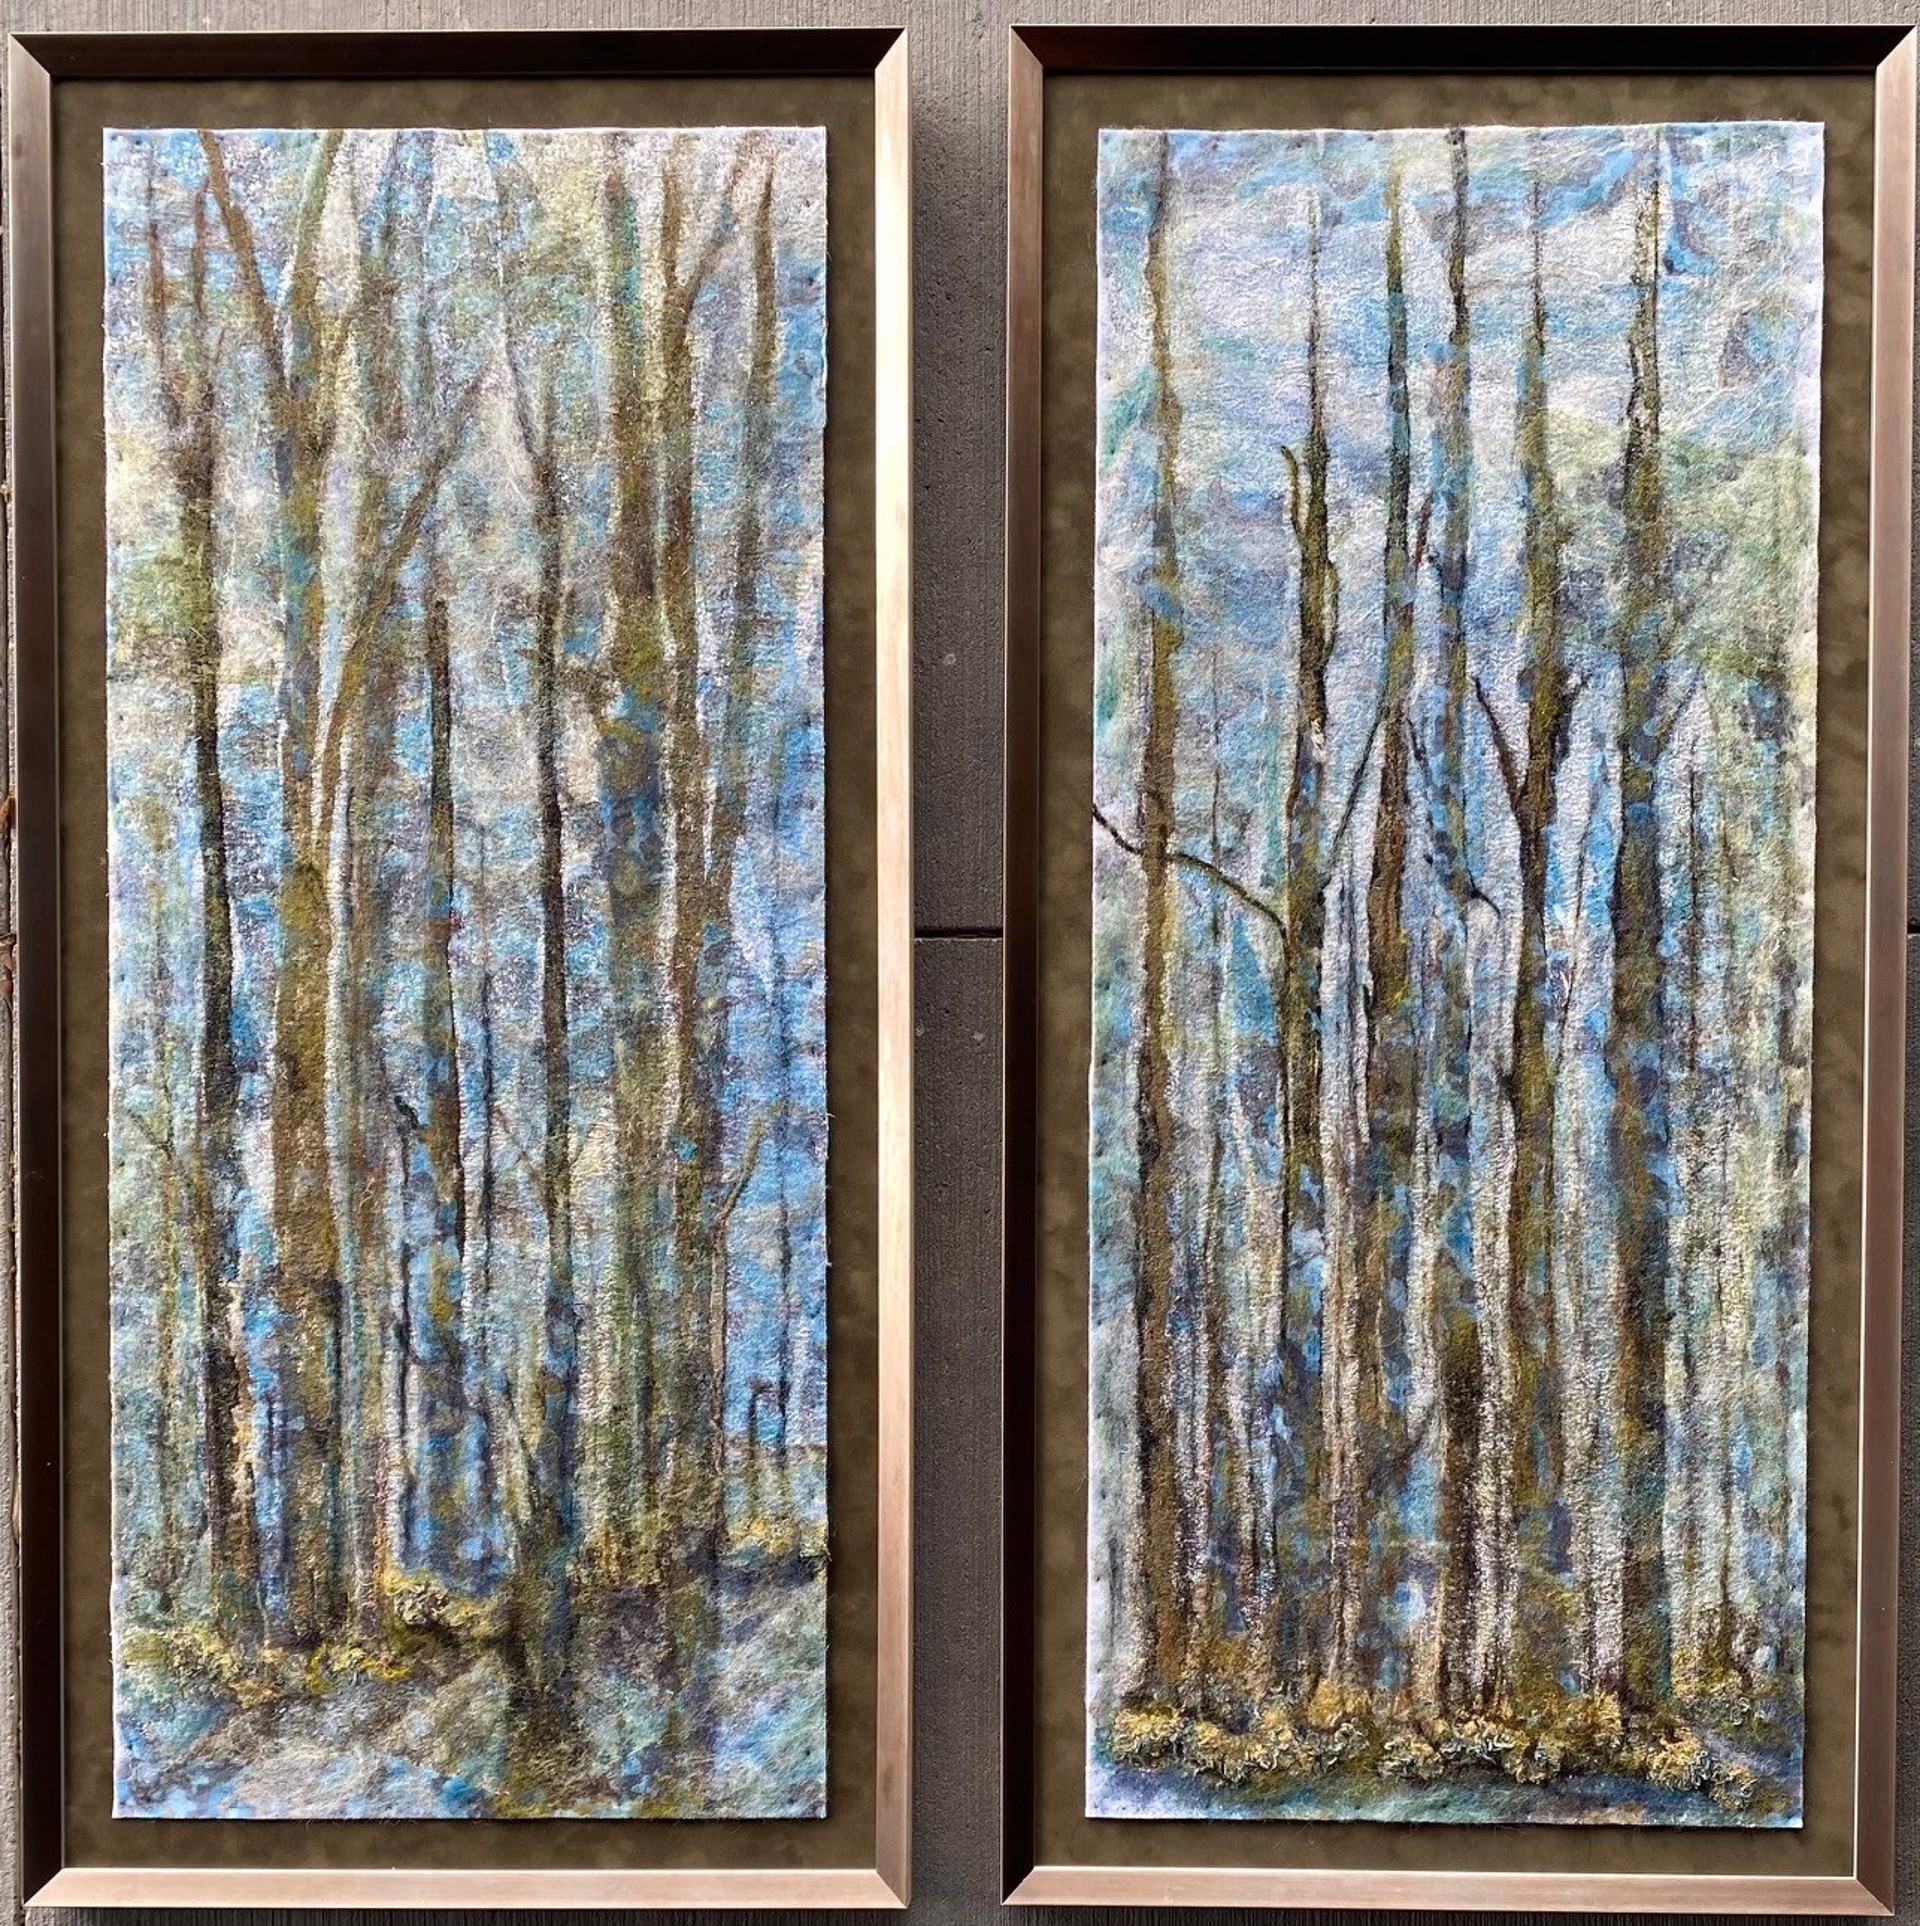 Among the Sycamores - Forest Bathing Diptych by Marti Liddle-Lameti